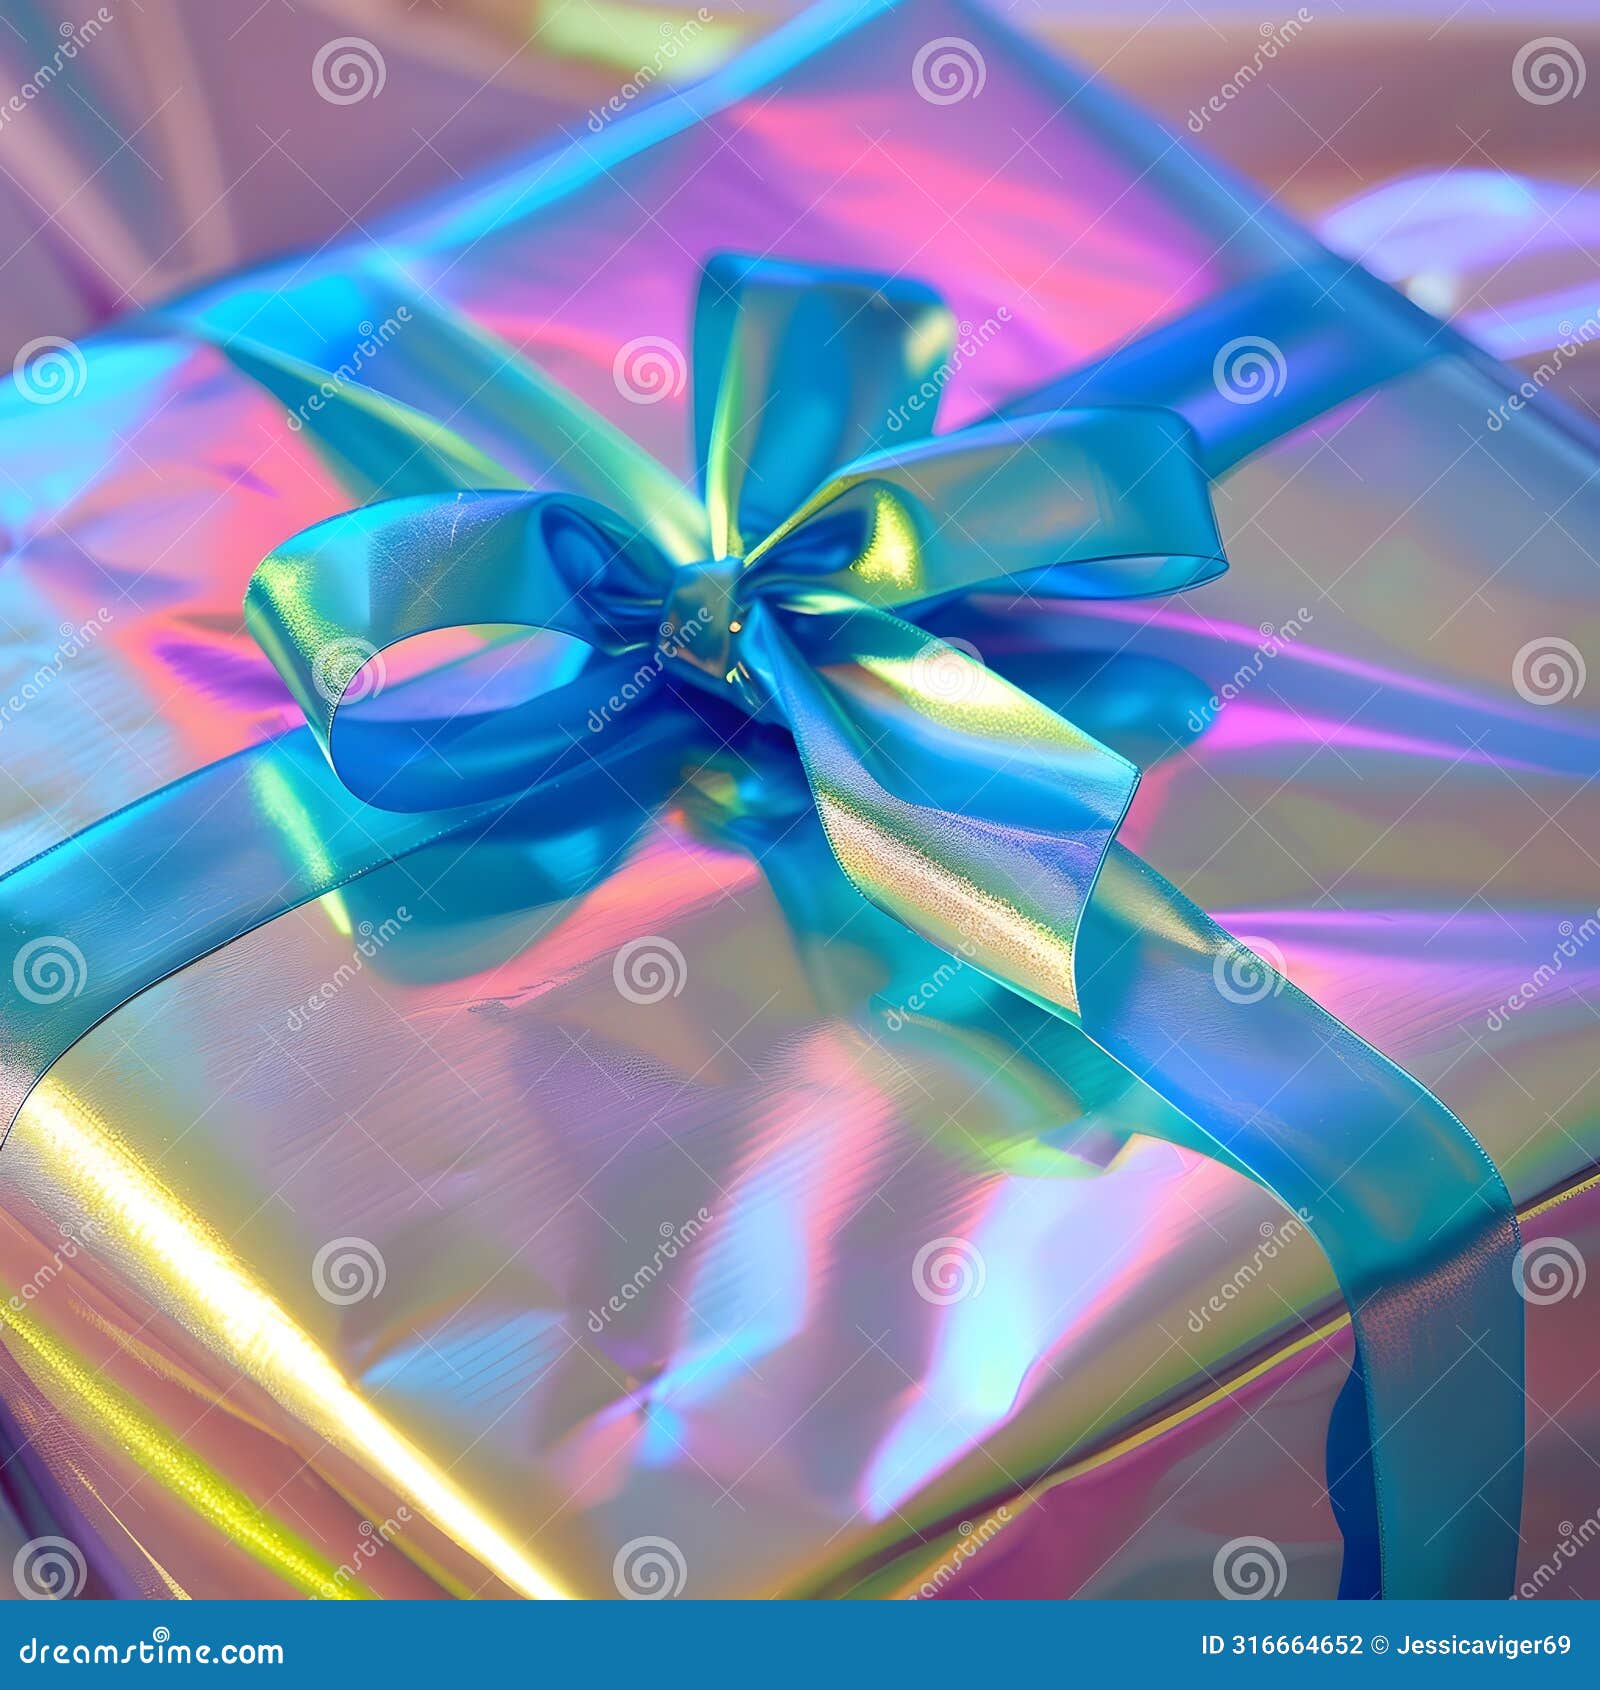 colorful gift box with blue ribbon, multicolor lights, chromatic